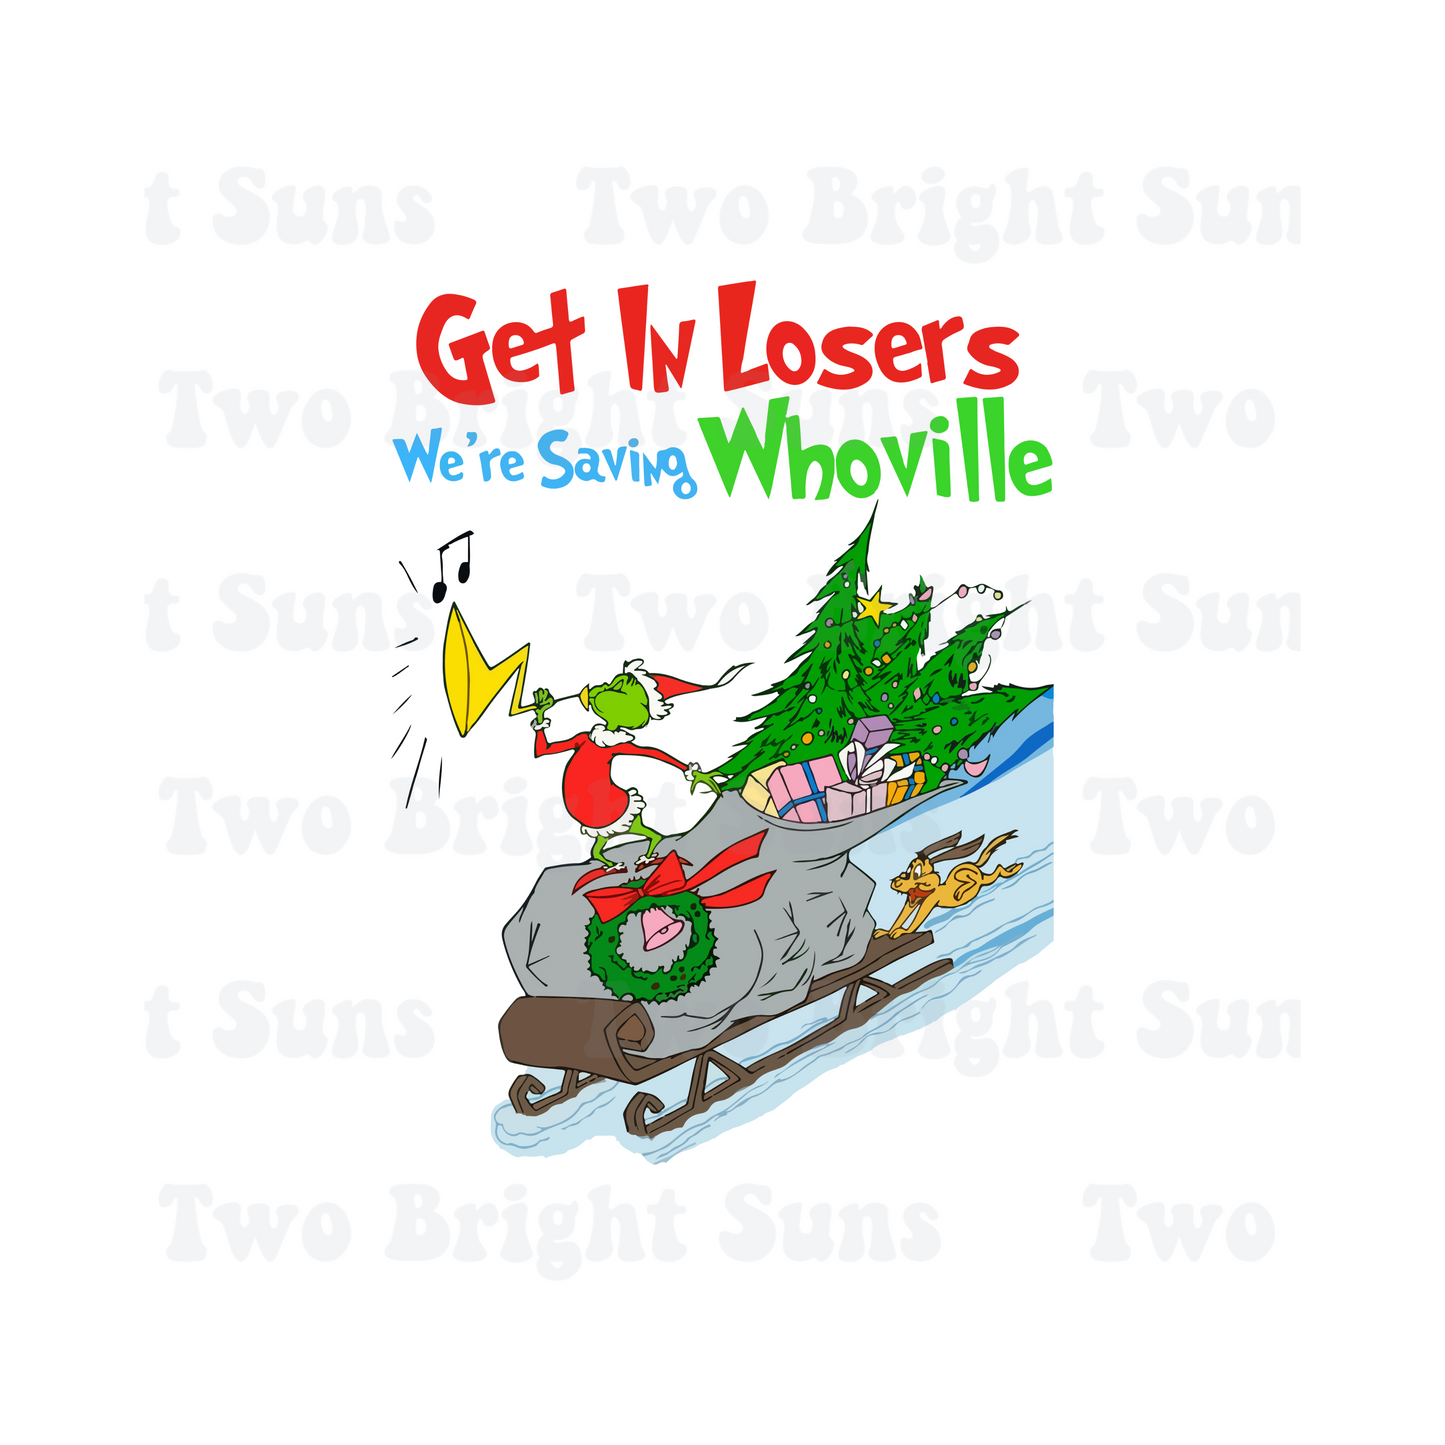 Get in Losers, We are saving Whoville